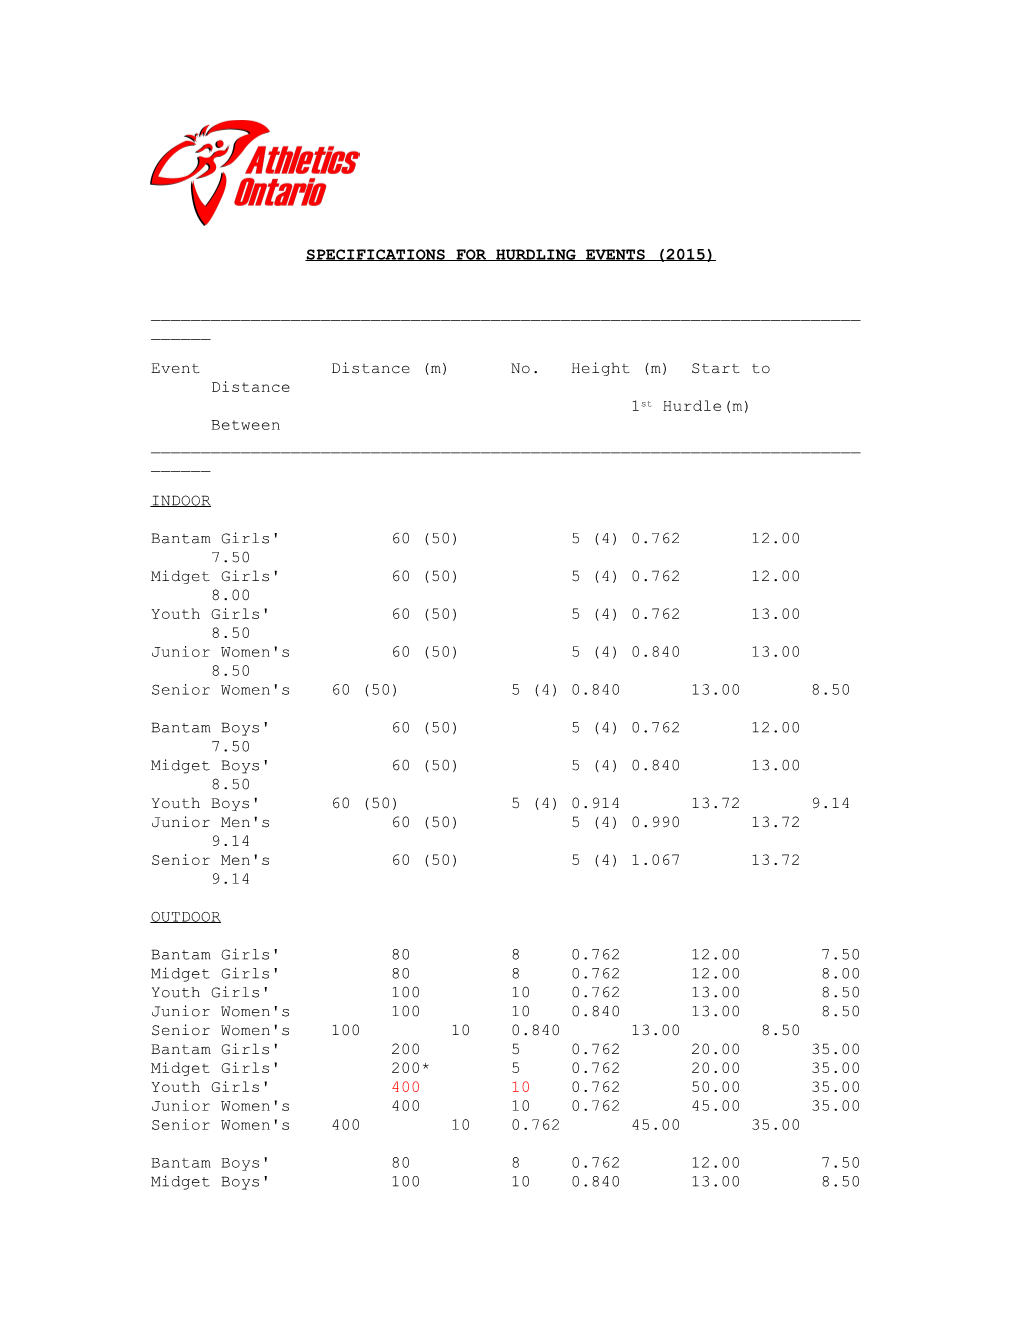 Specifications for Hurdling Events (2015)